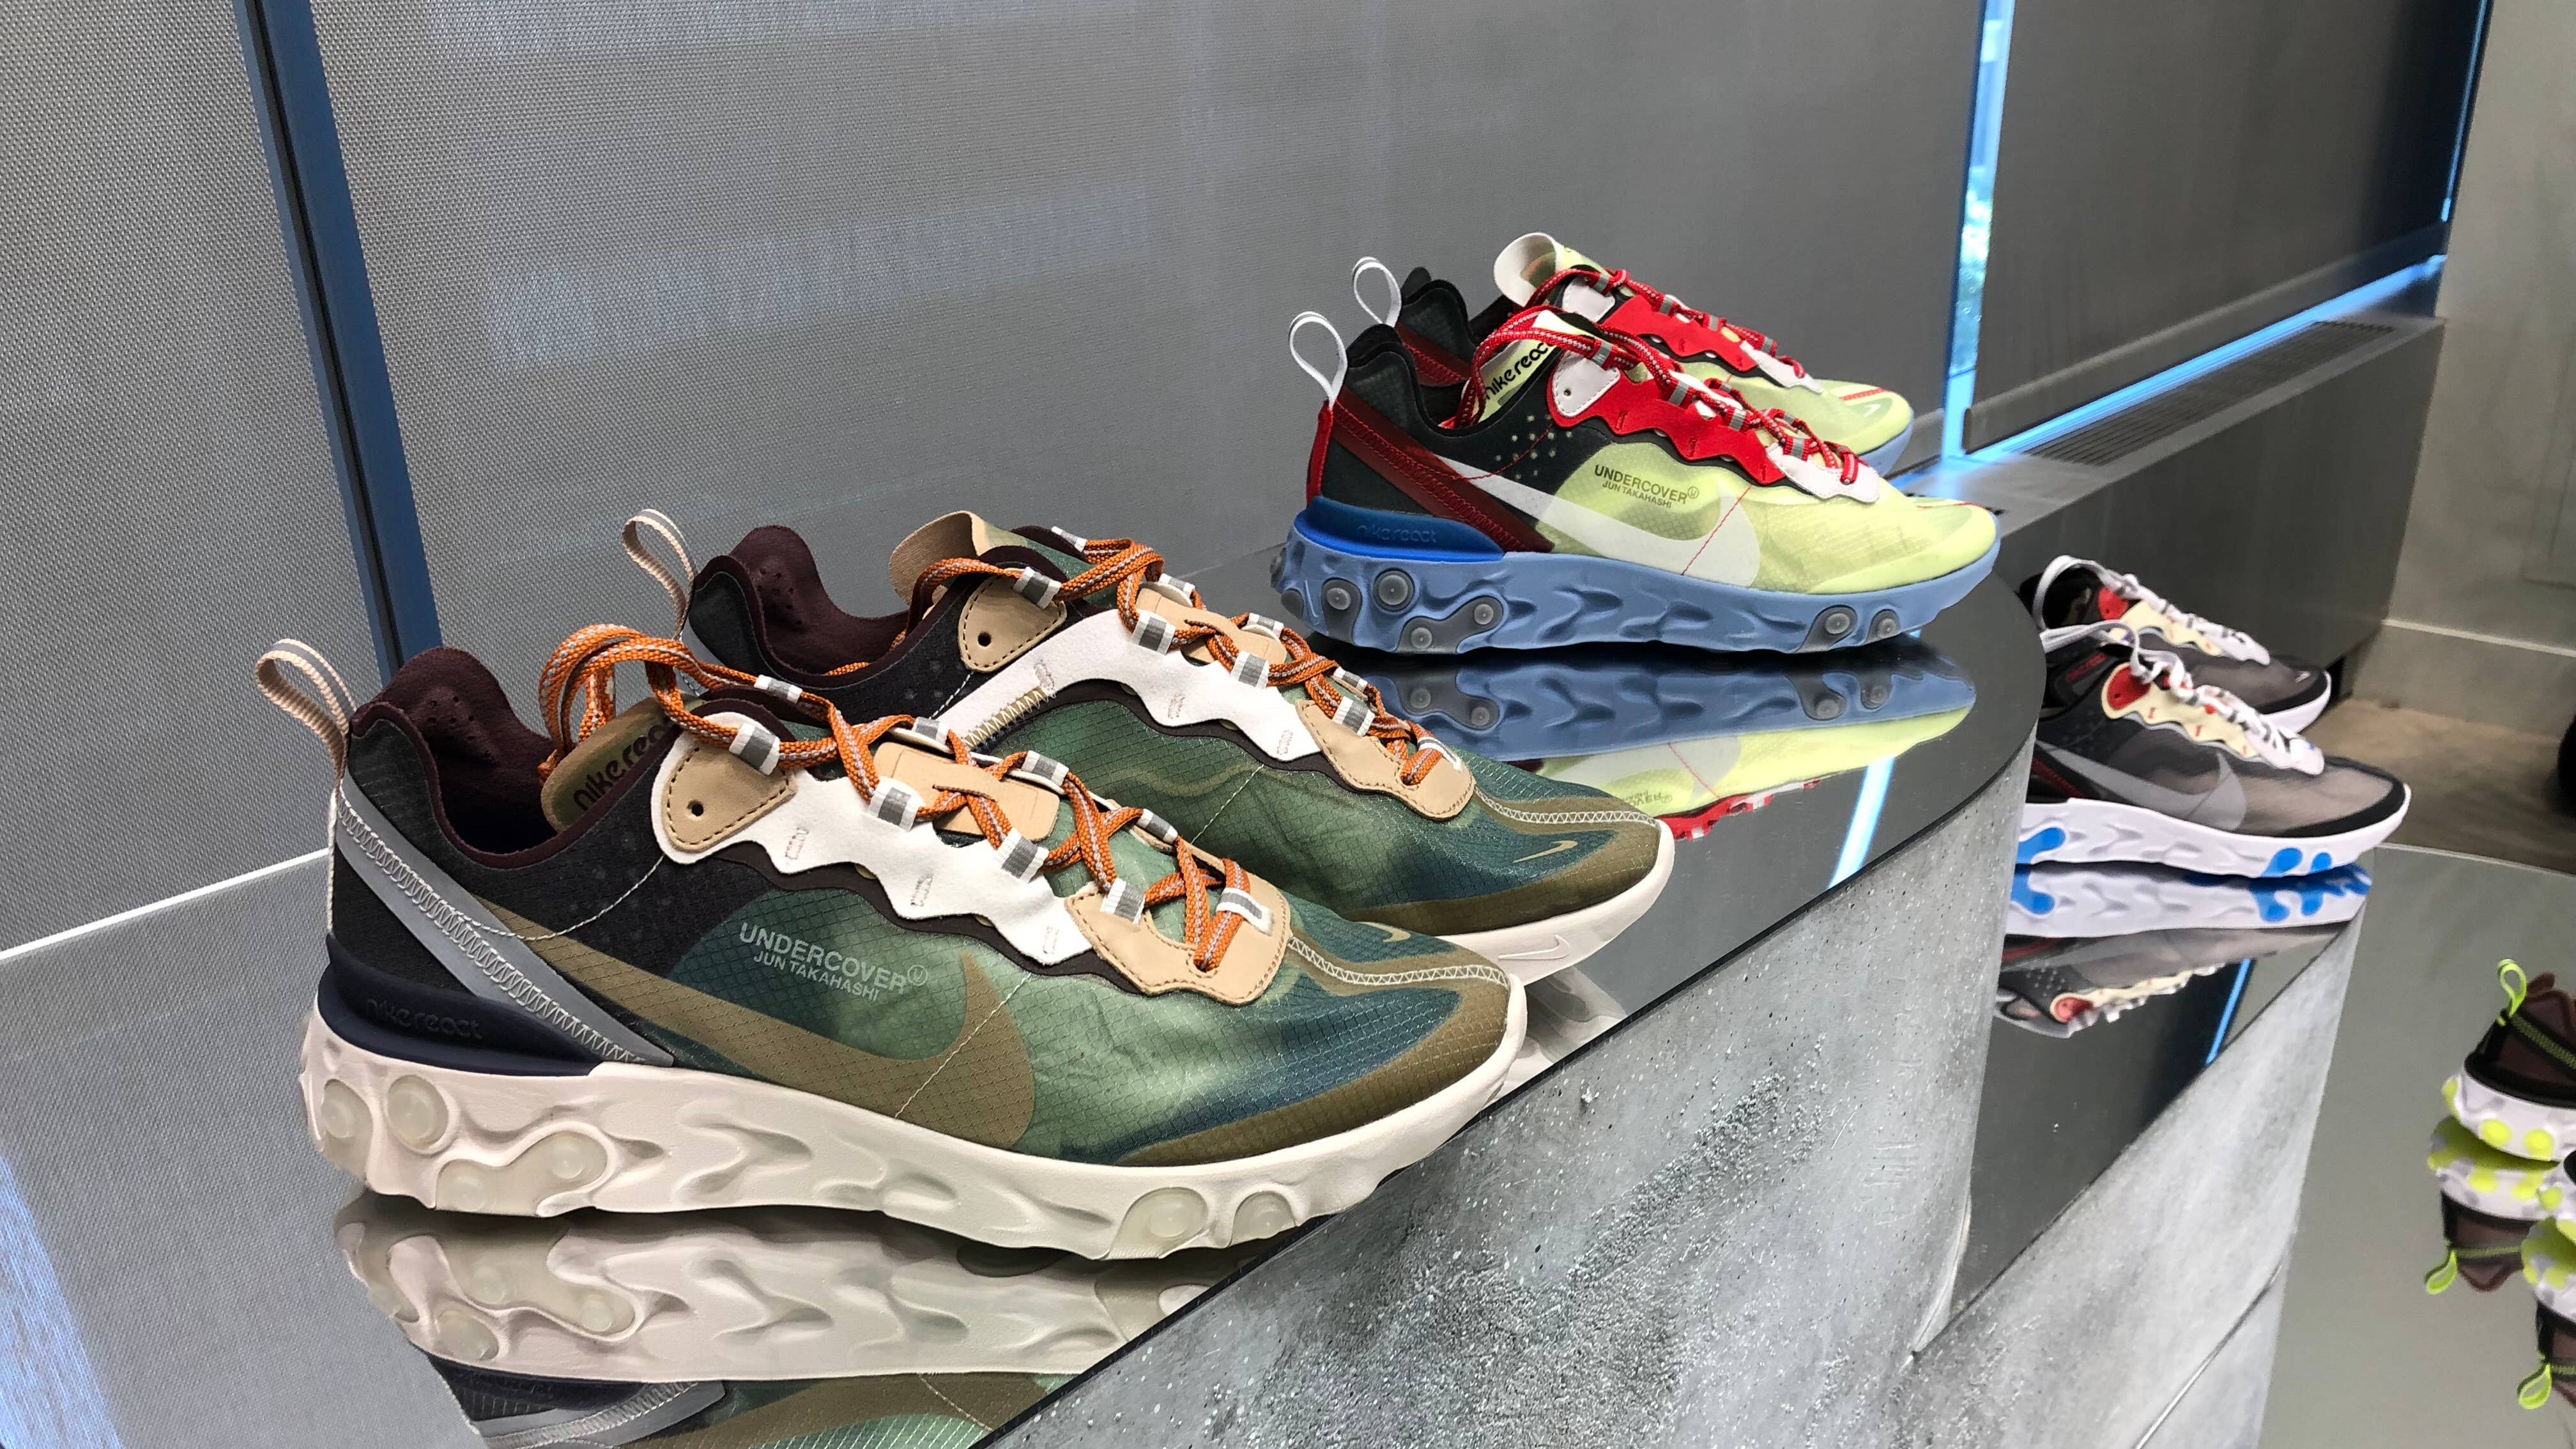 brevpapir blotte crush A Closer Look at Two More Pairs of Undercover's React Element 87s | Complex